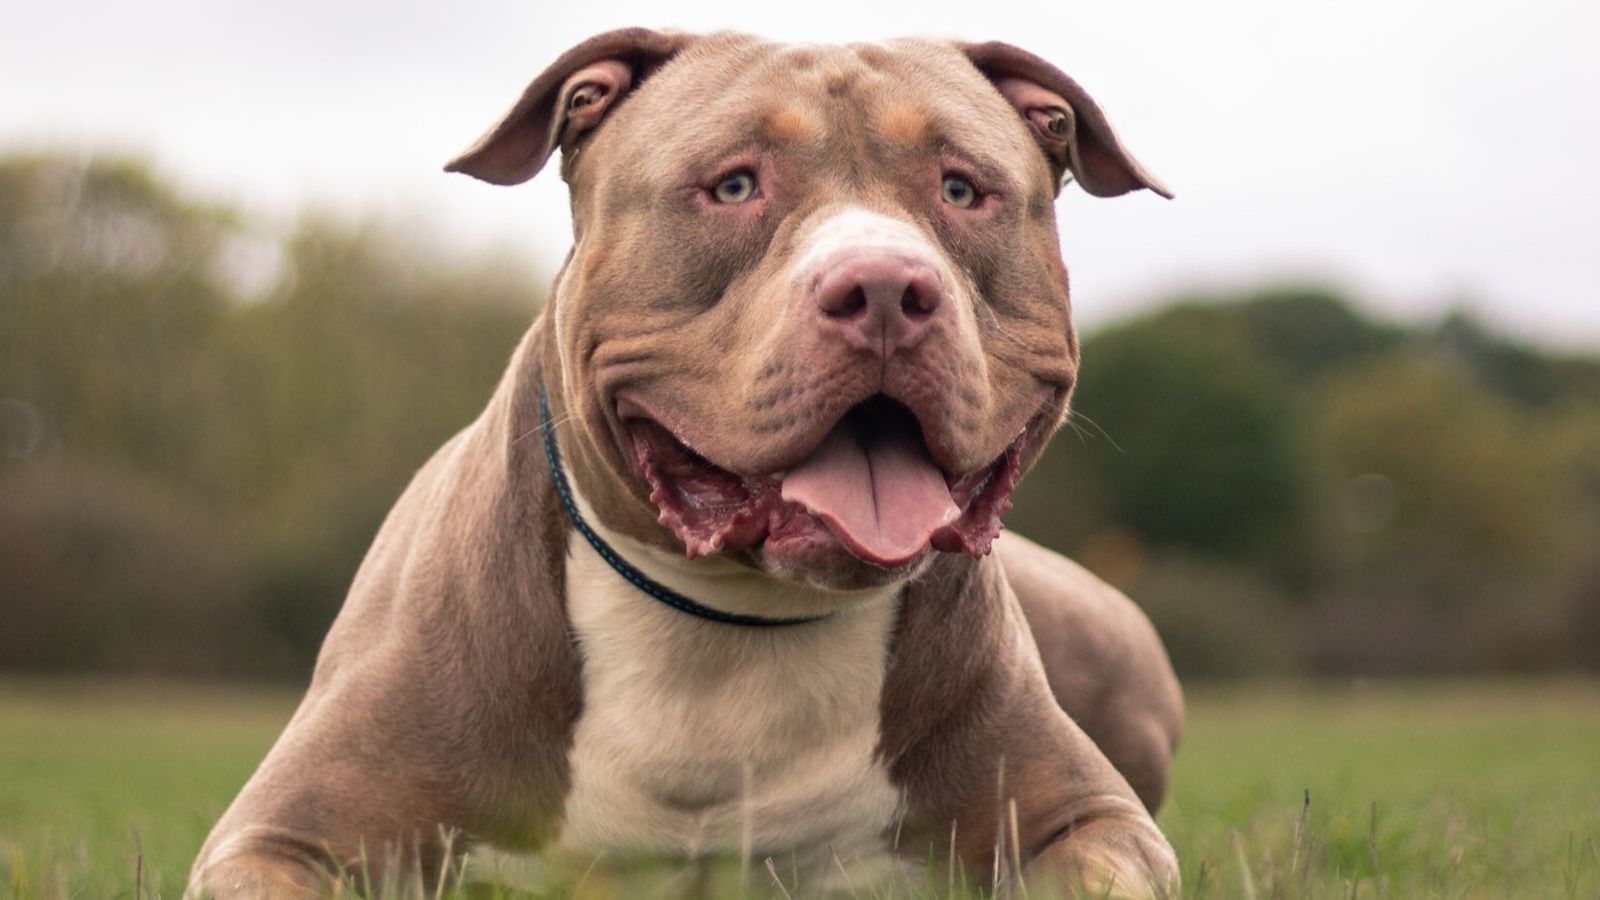 Applications open for owners to register American XL bully dogs ahead of ban